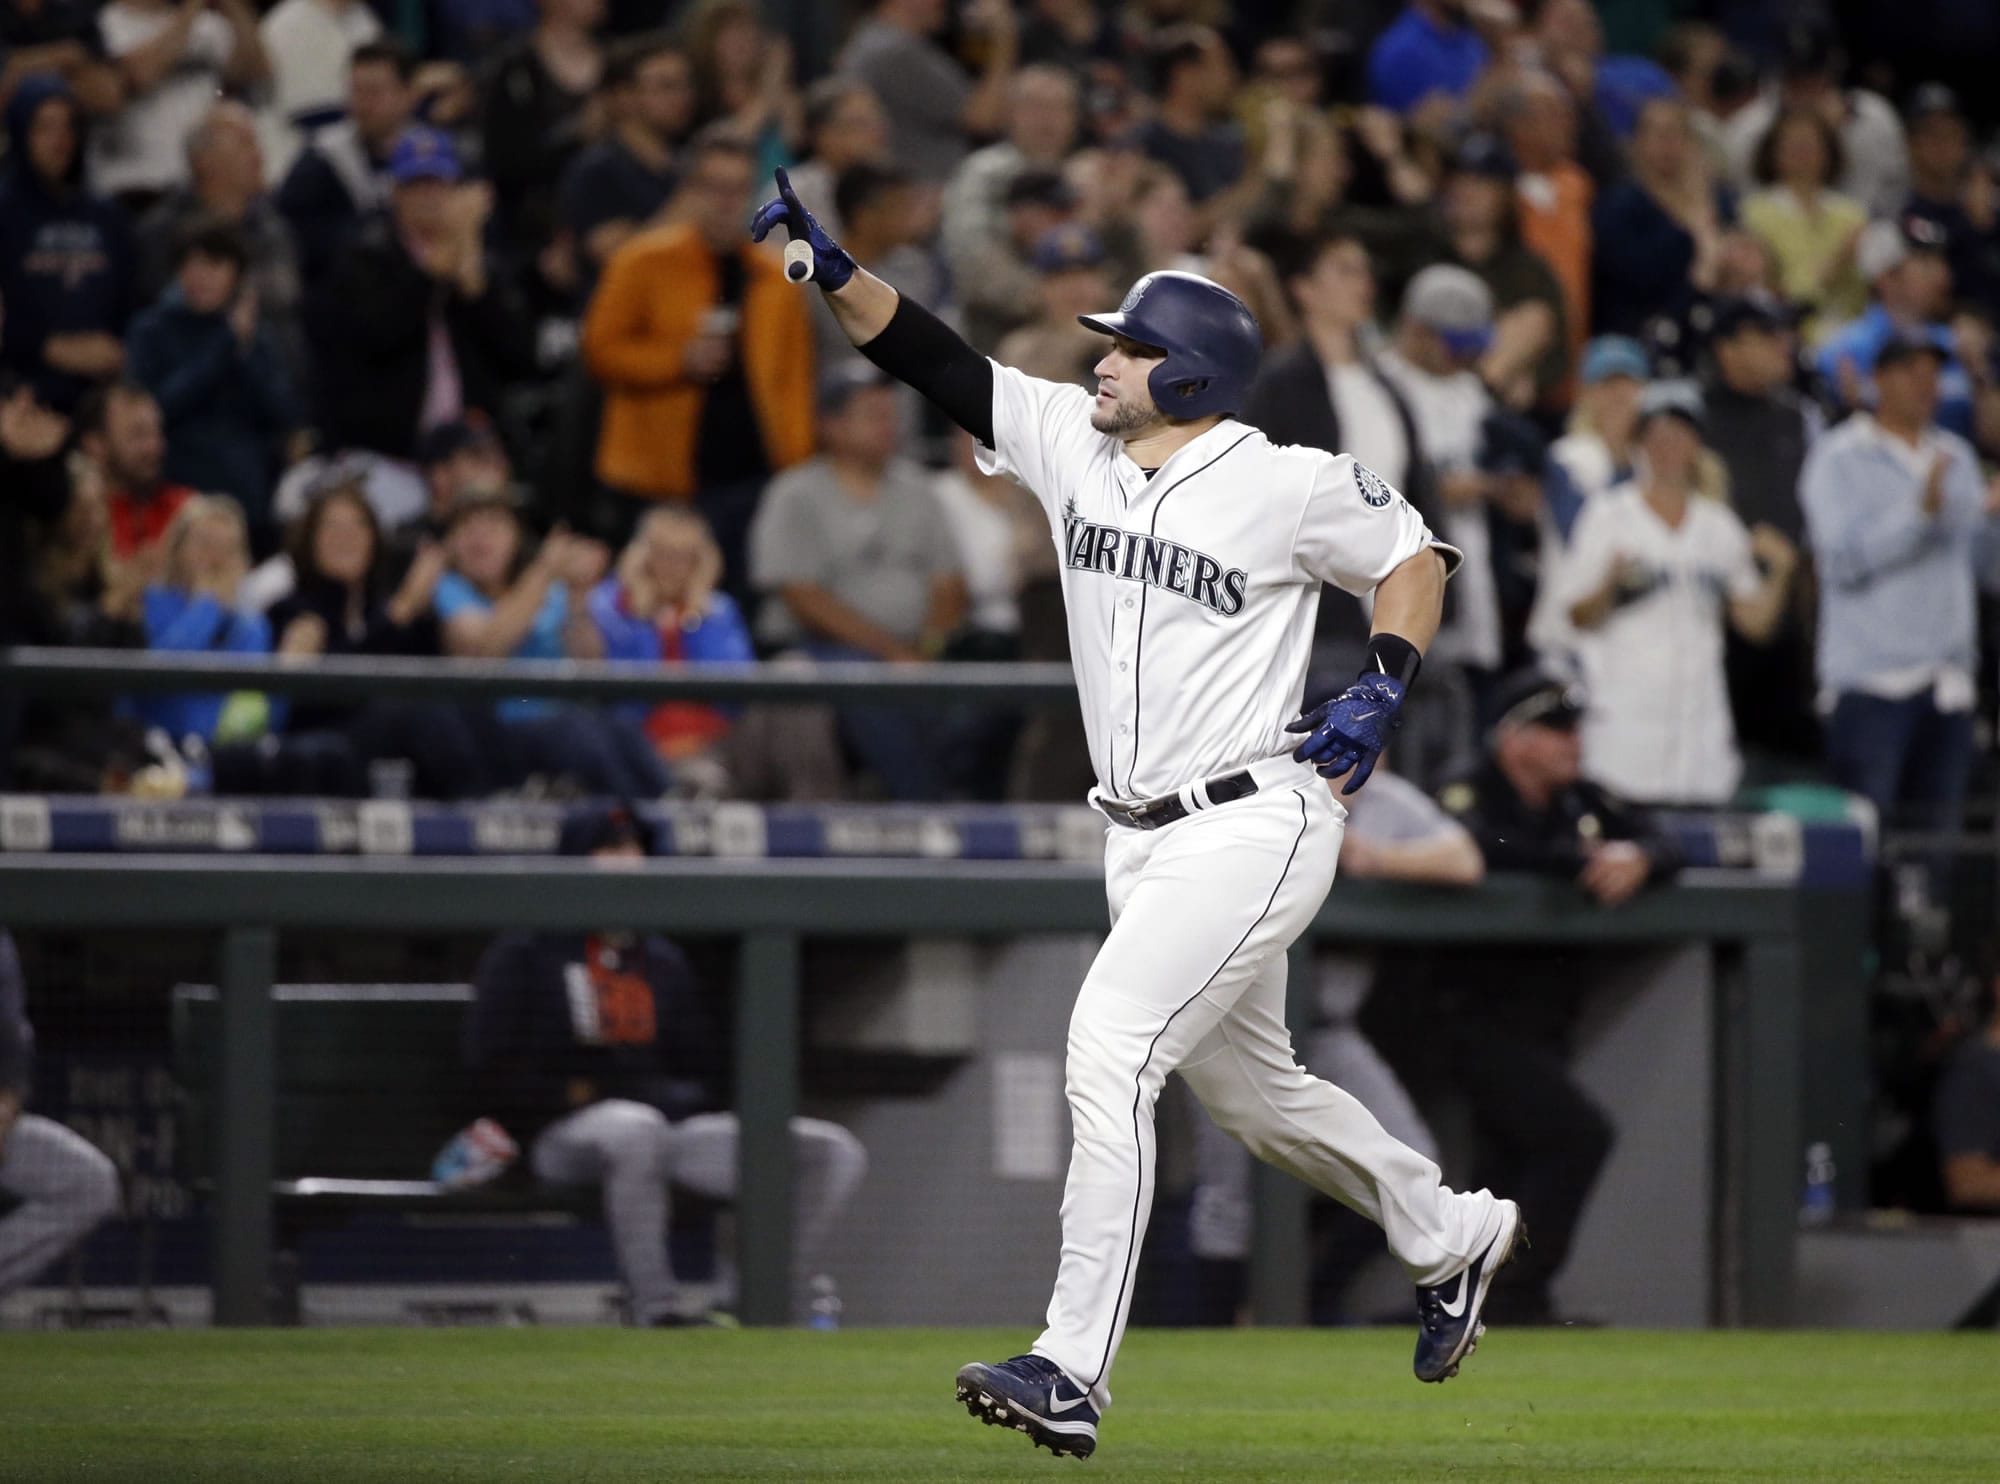 Seattle Mariners' Mike Zunino points toward the stands as he heads home on his two-run home run against the Detroit Tigers in the sixth inning of a baseball game Monday, June 19, 2017, in Seattle.